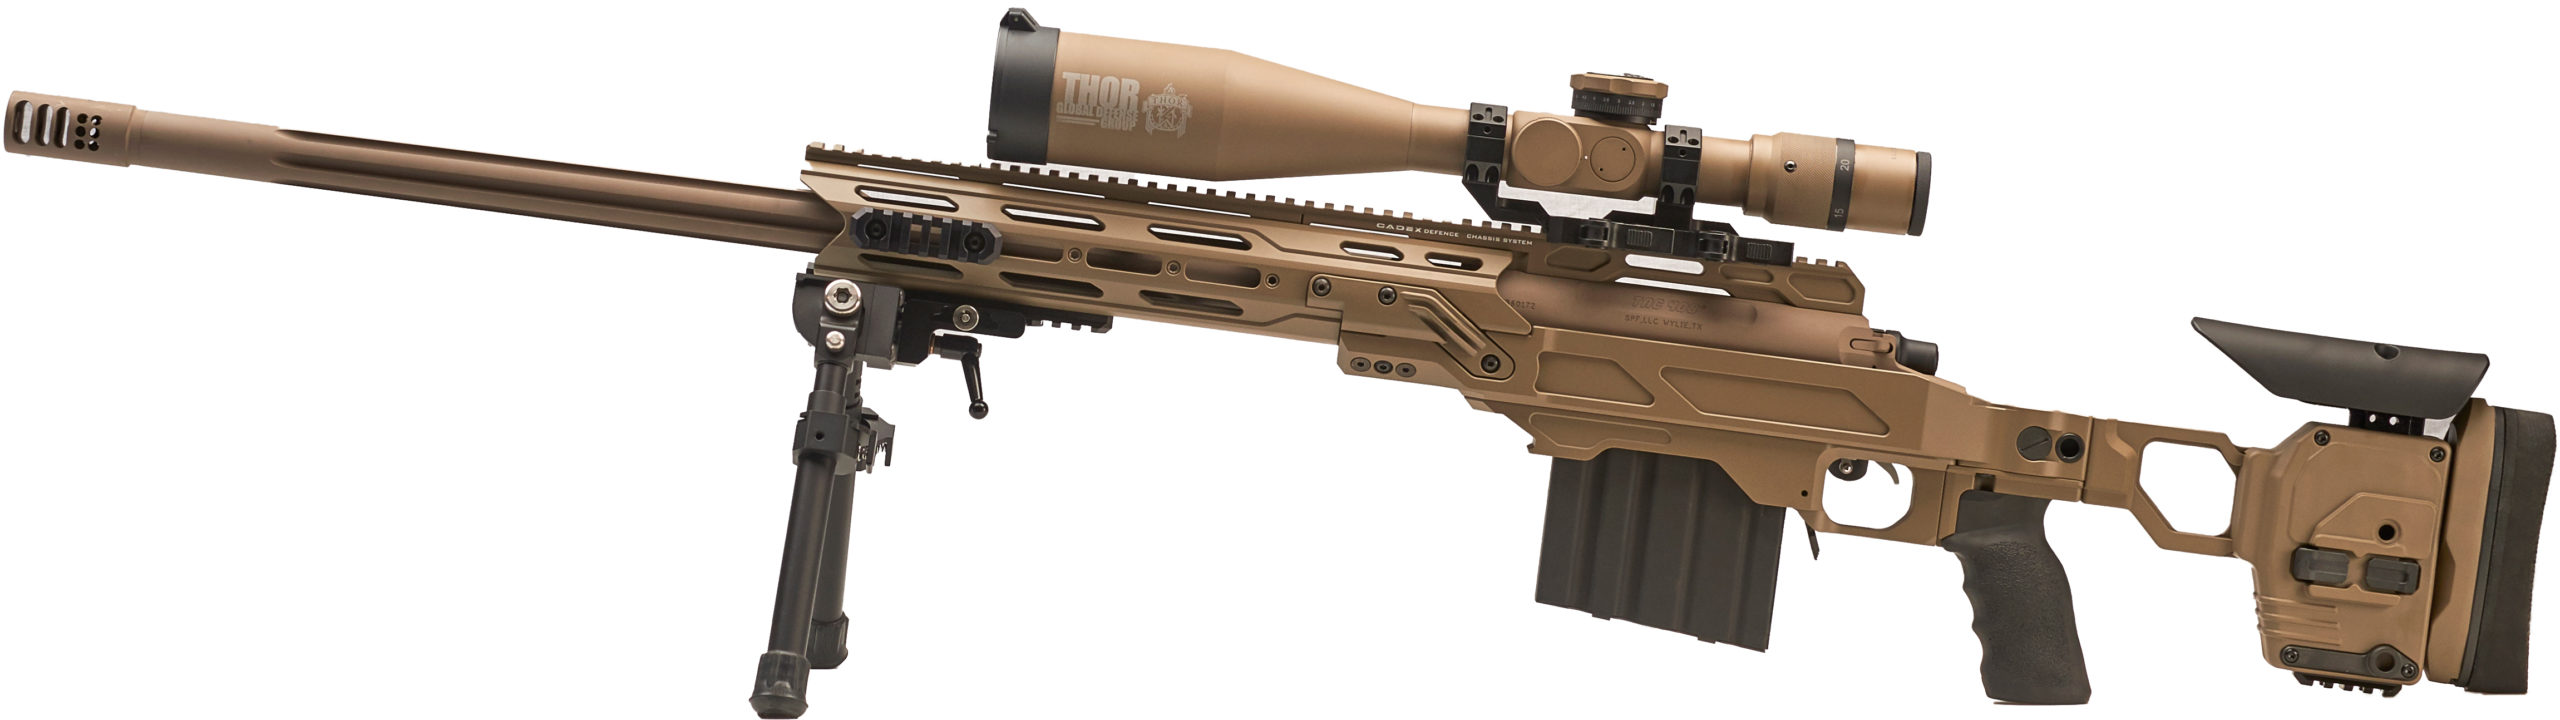 THOR TR375 Rifle .375CT Cadex Chassis